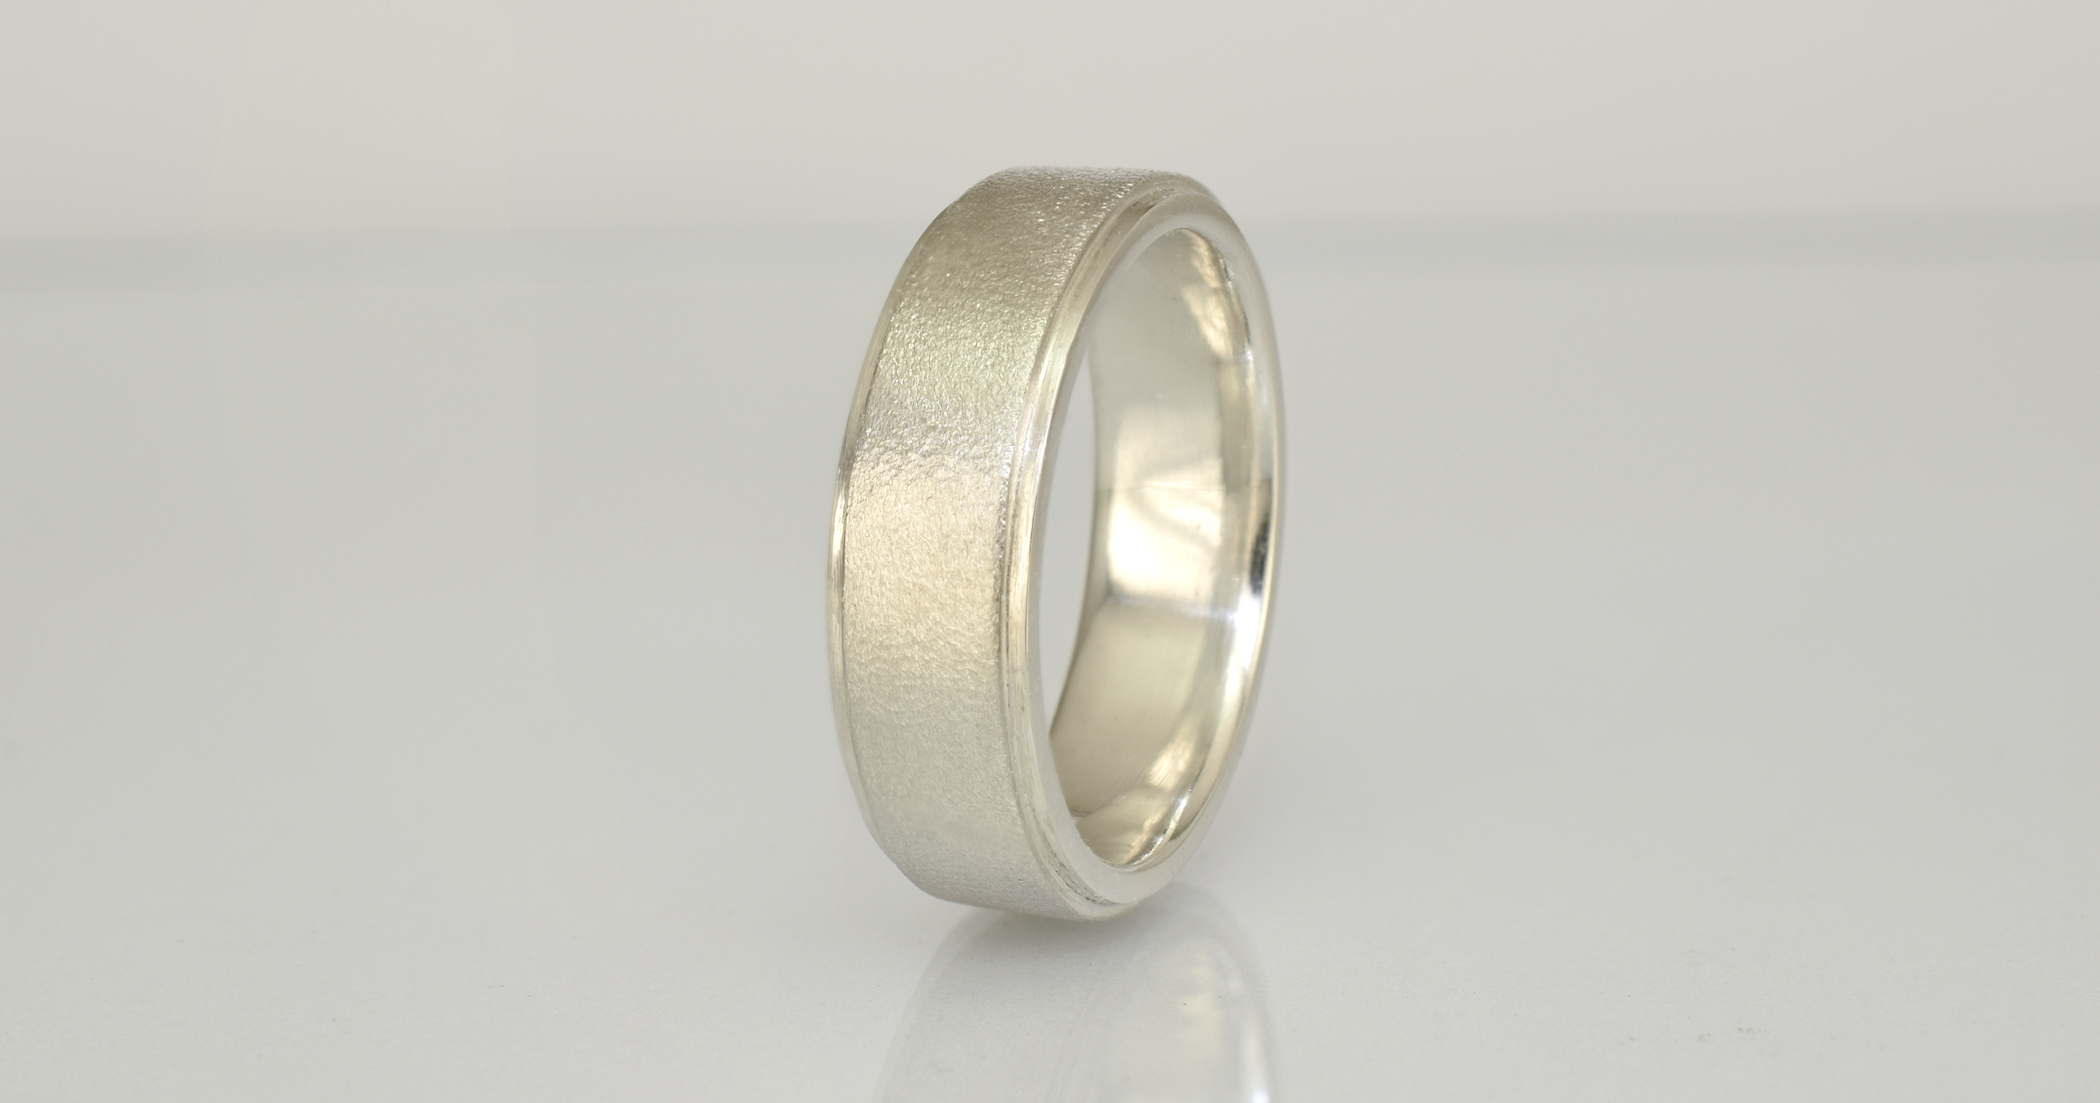  1 - Groom`s palladium sterling silver wedding ring delivery. 